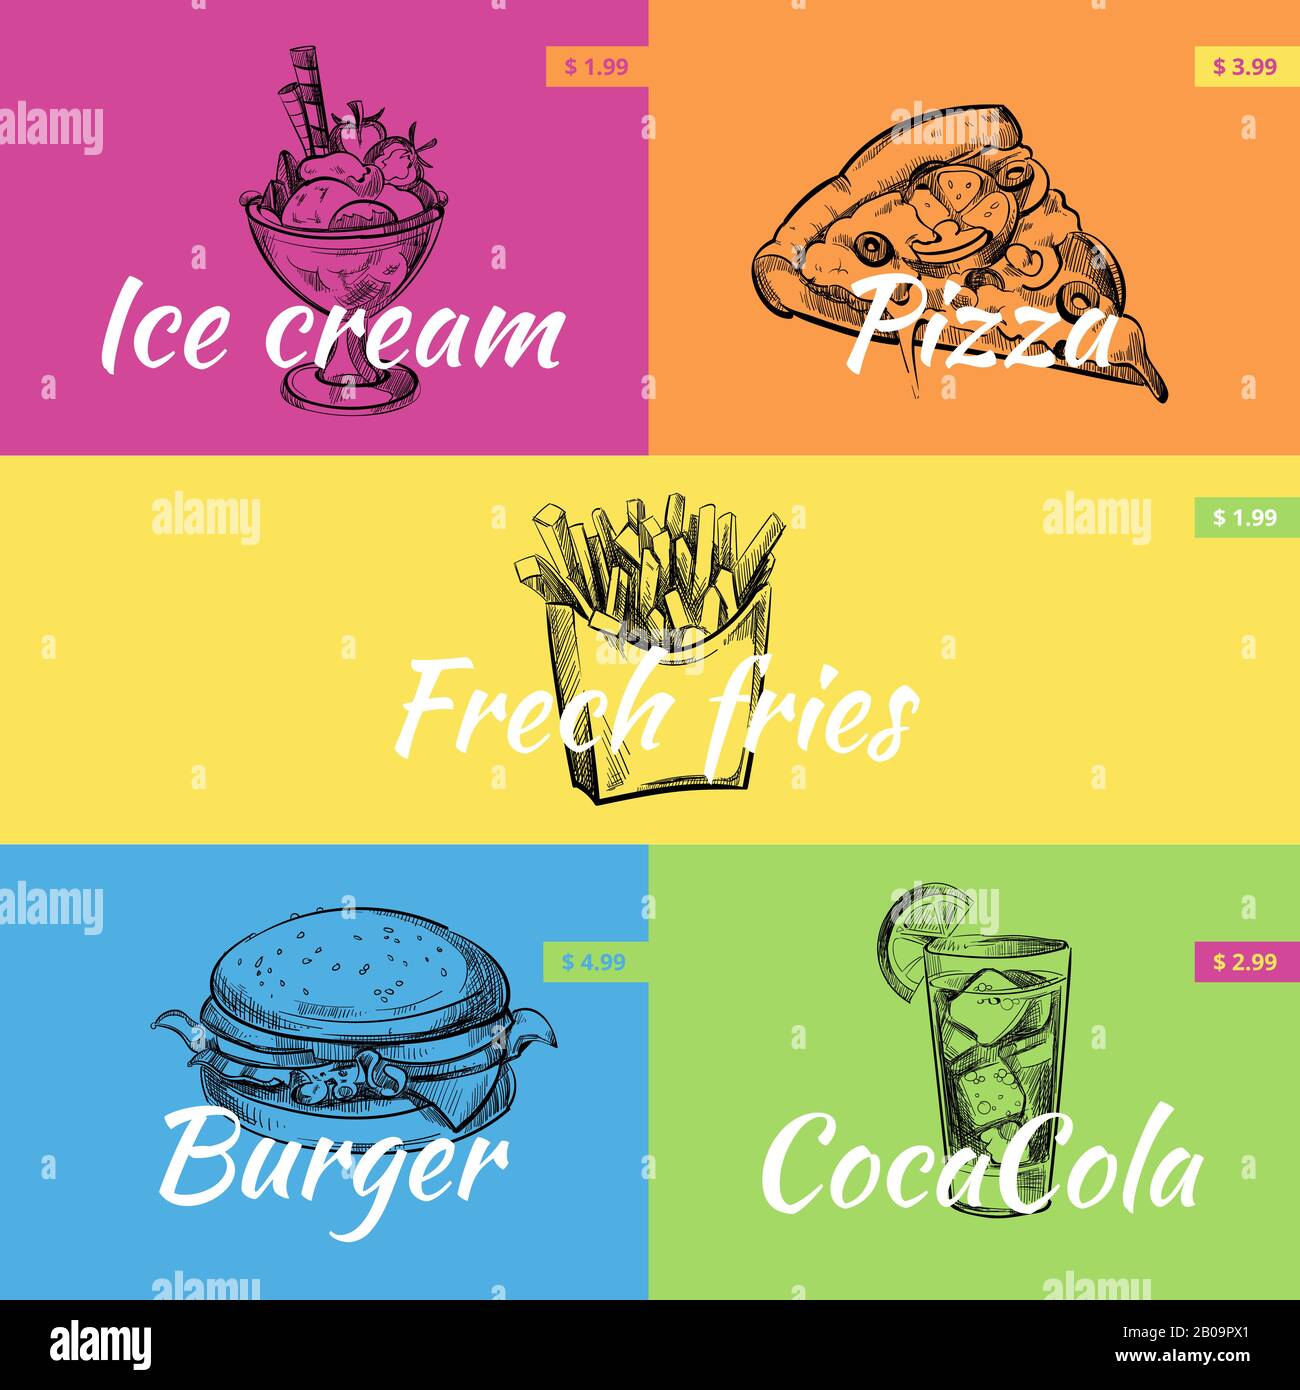 Retro hand drawn fast food vector posters set. Fast food restaurant menu price, illustration of burger and pizza food Stock Vector